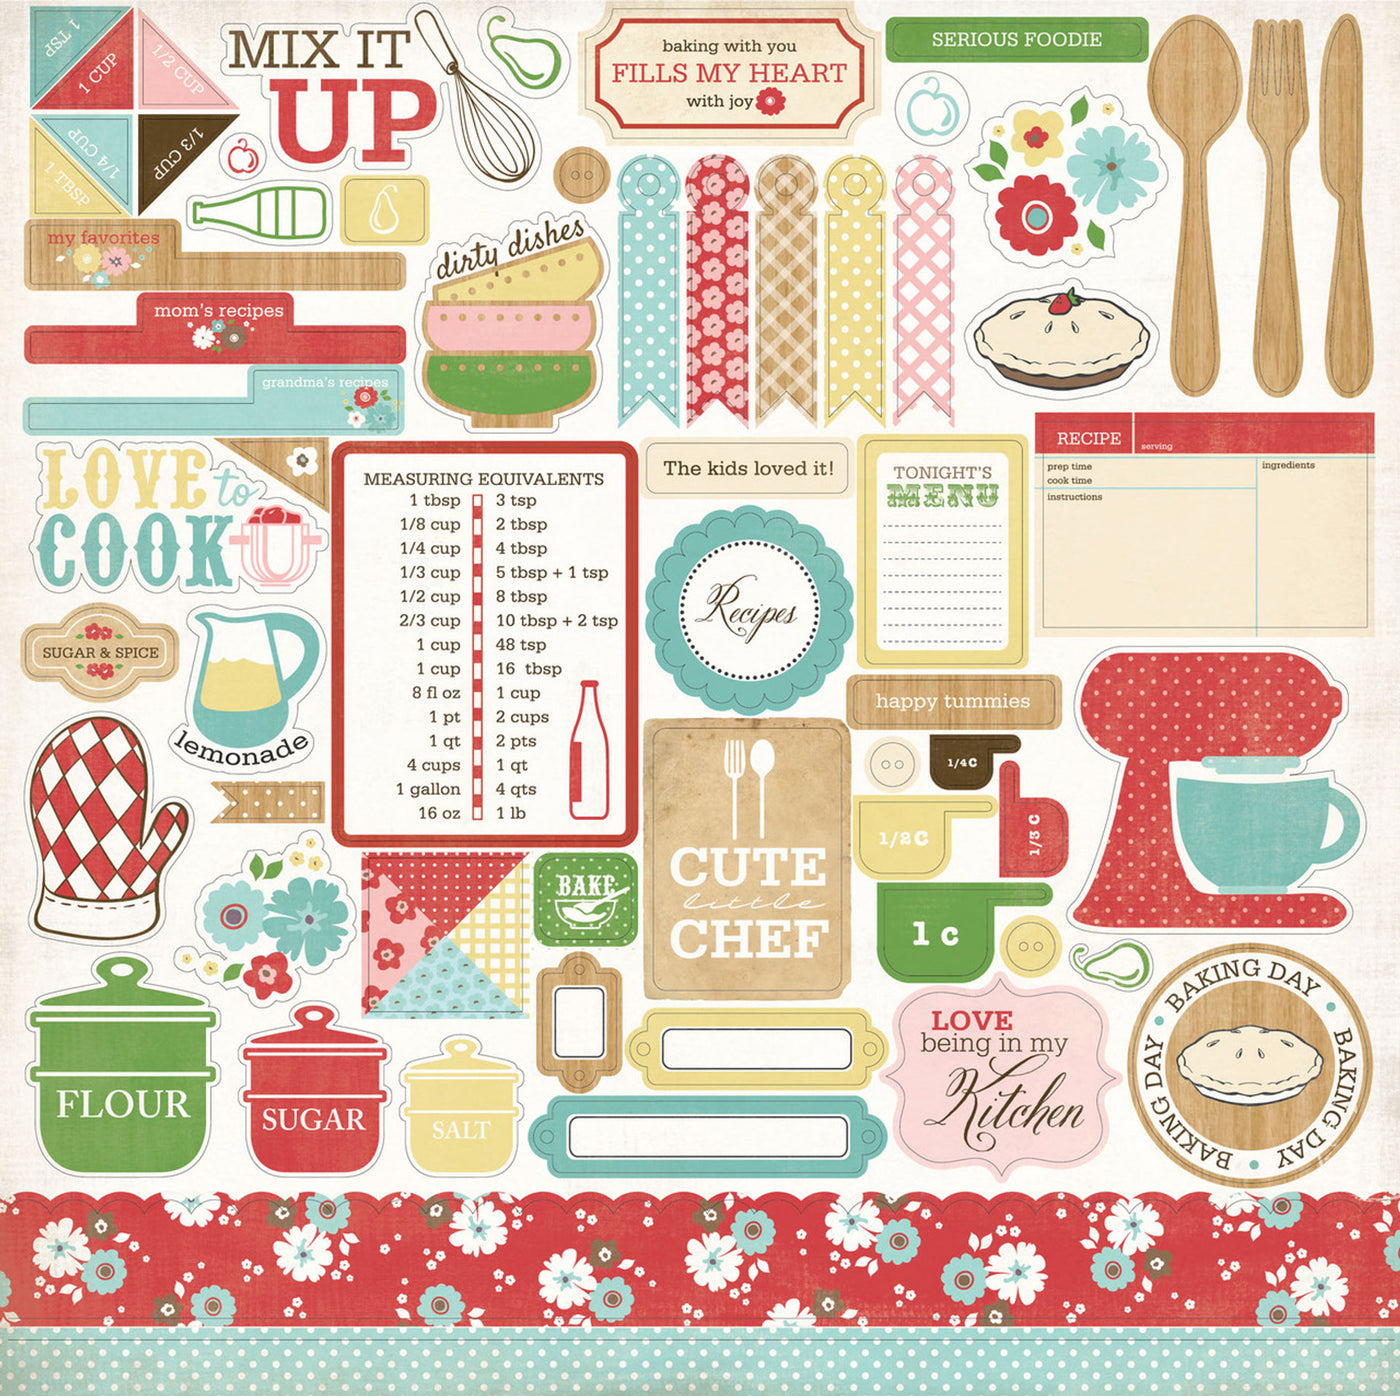 Homemade With Love Elements 12" x 12" Cardstock Stickers from the Homemade With Love Collection. The package includes one sheet of cardstock stickers with phrases and images of utensils, borders, mixing bowls, measuring cups, tags, and more.